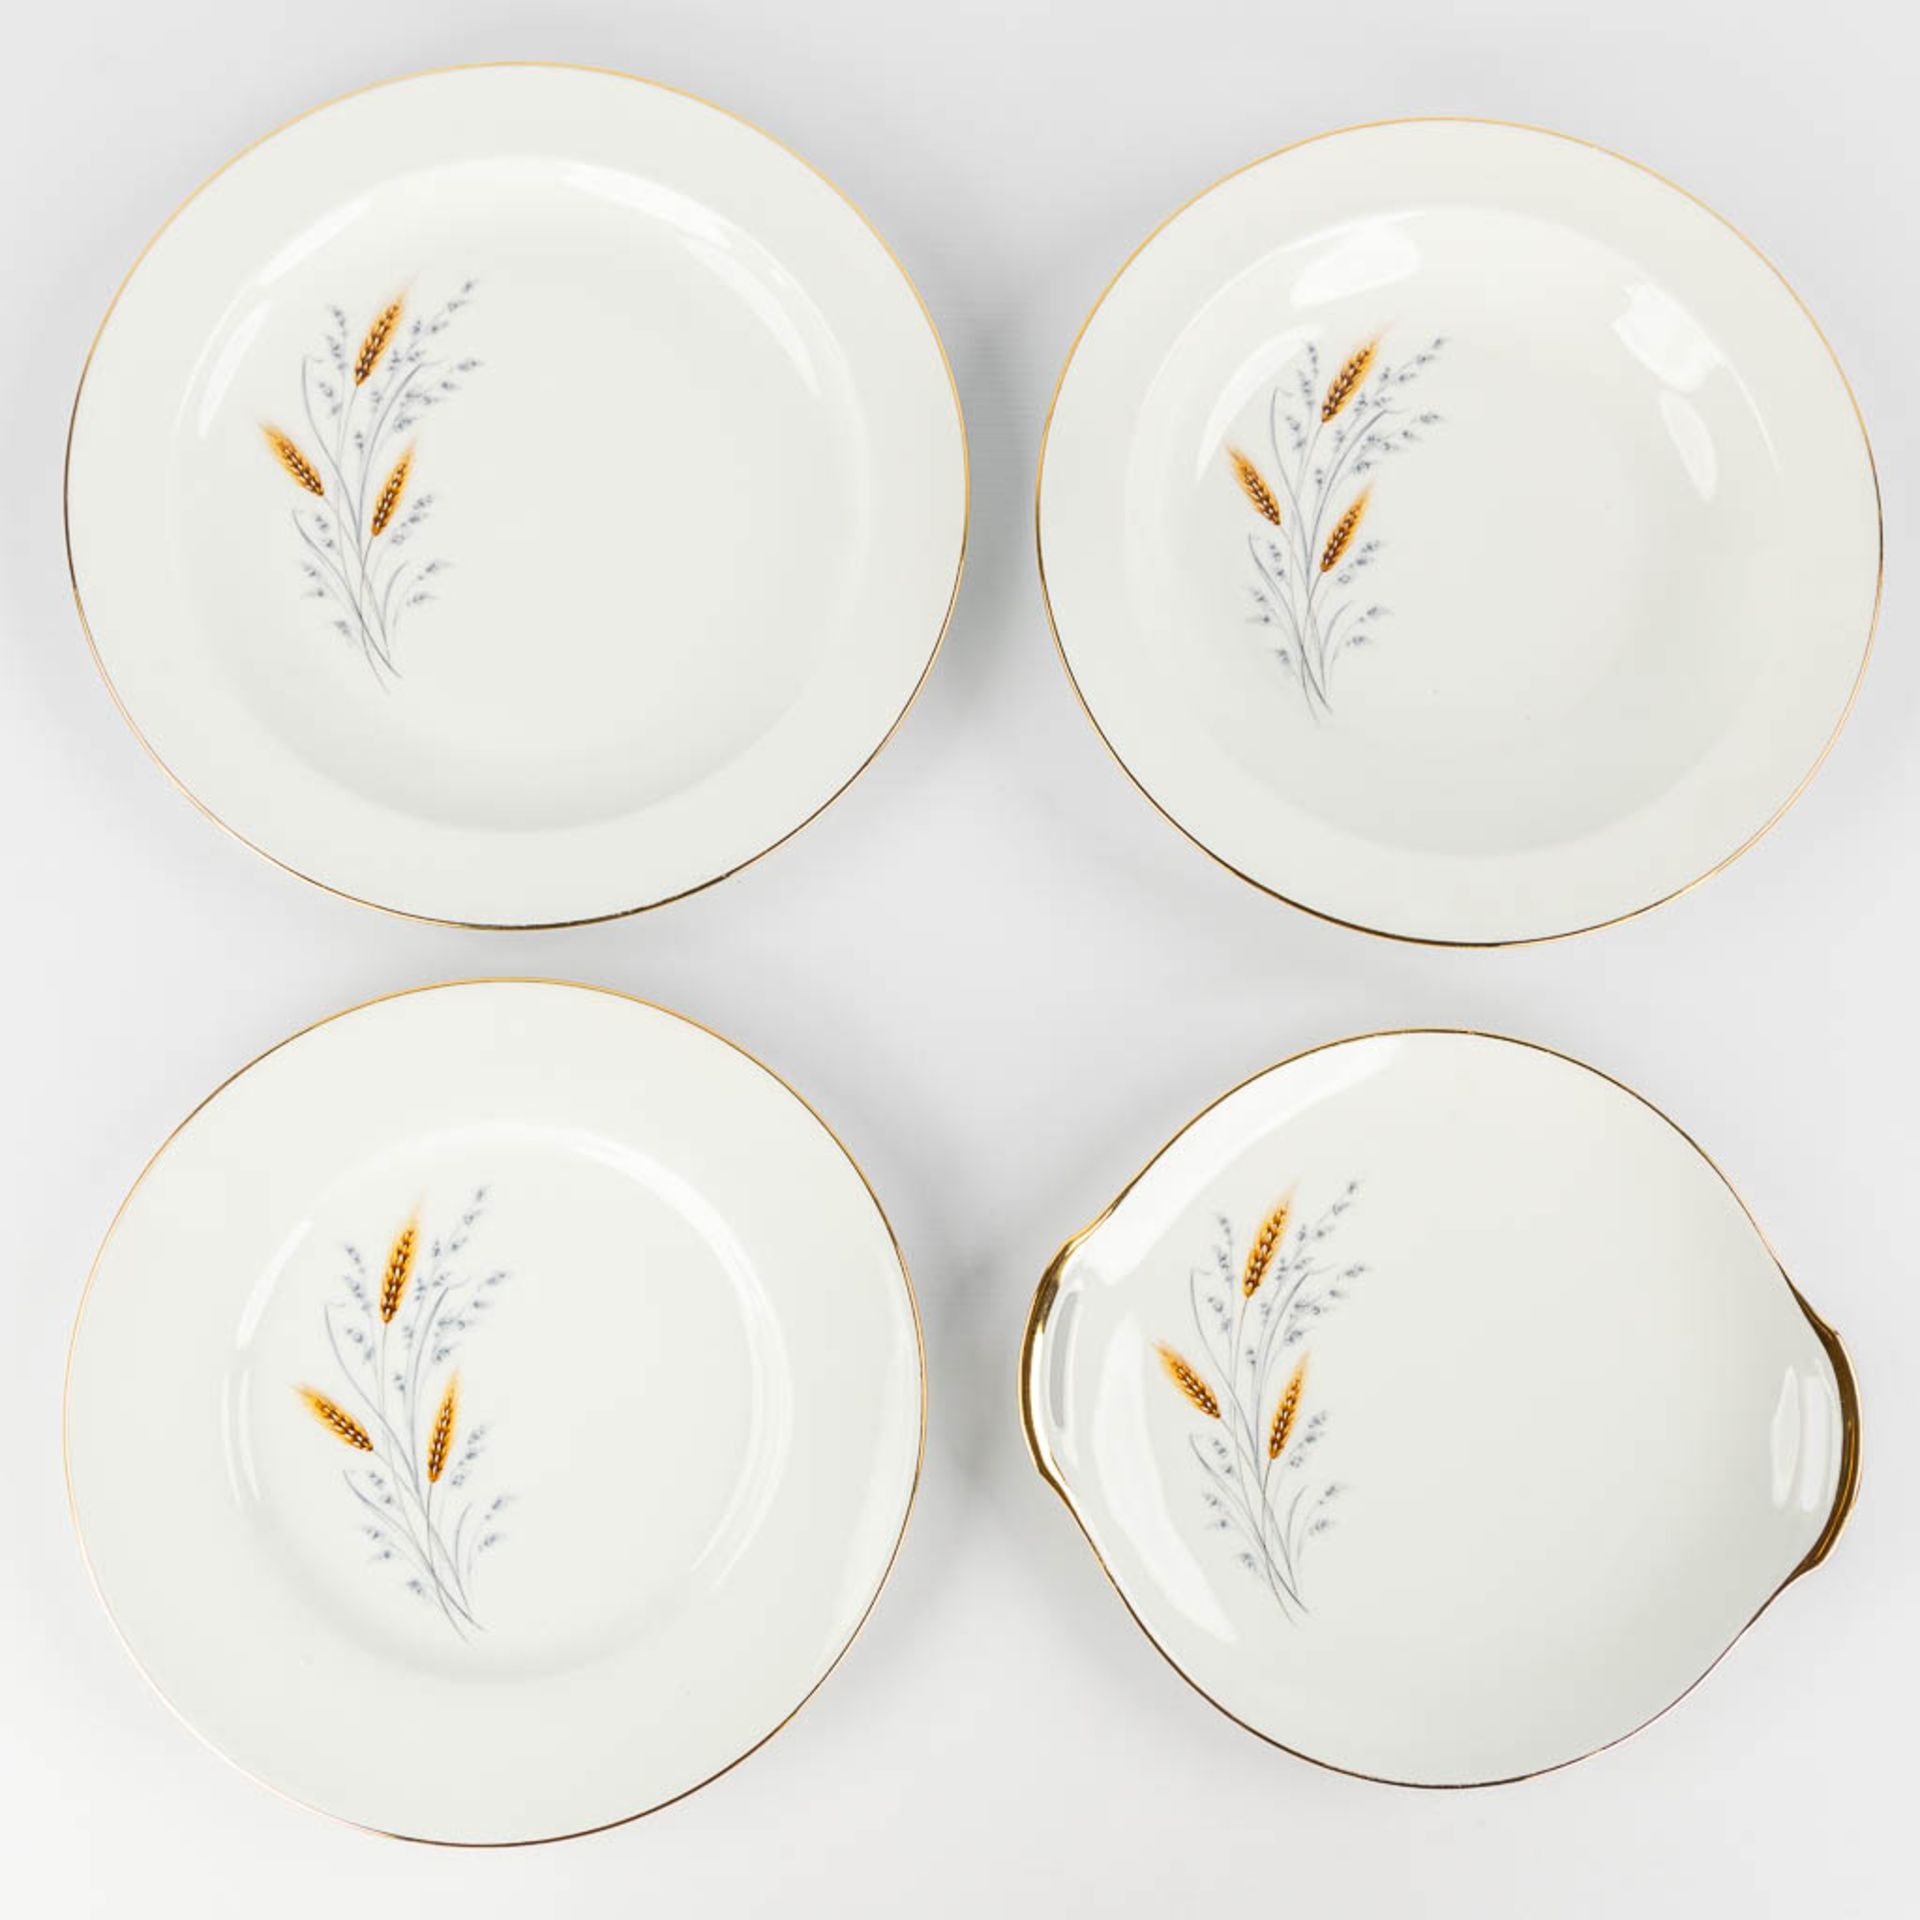 Limoges, France, a large, 12-person dinner, wild and coffee service. (L:23 x W:34 x H:22 cm) - Image 16 of 28